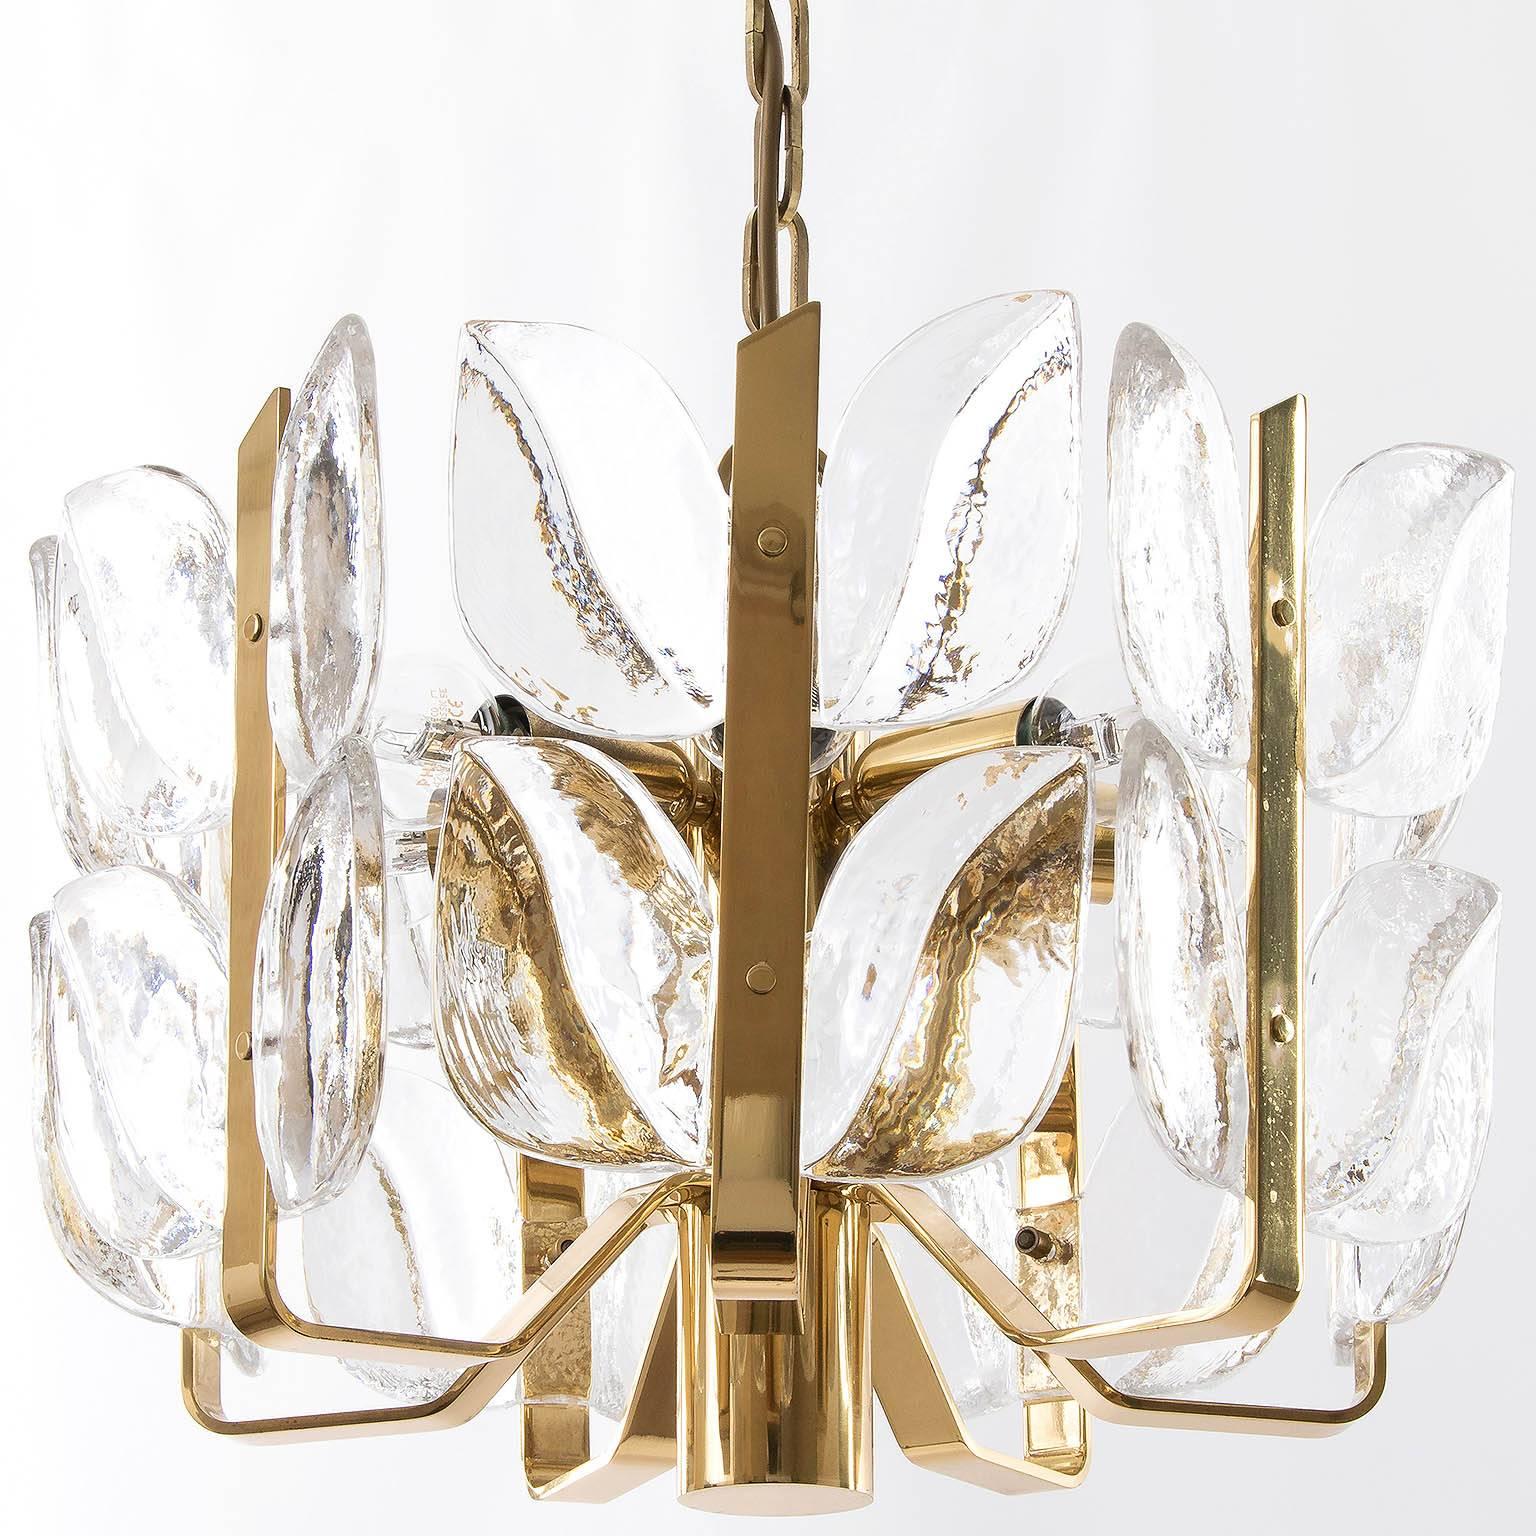 Handmade and high quality chandelier by J.T. Kalmar, Austria, 1960s. Made of polished brass and large fire-polished brillant crystal glasses.
Excellent original condition with very little patina on brass. Seven small base bulbs (max. 40 W per